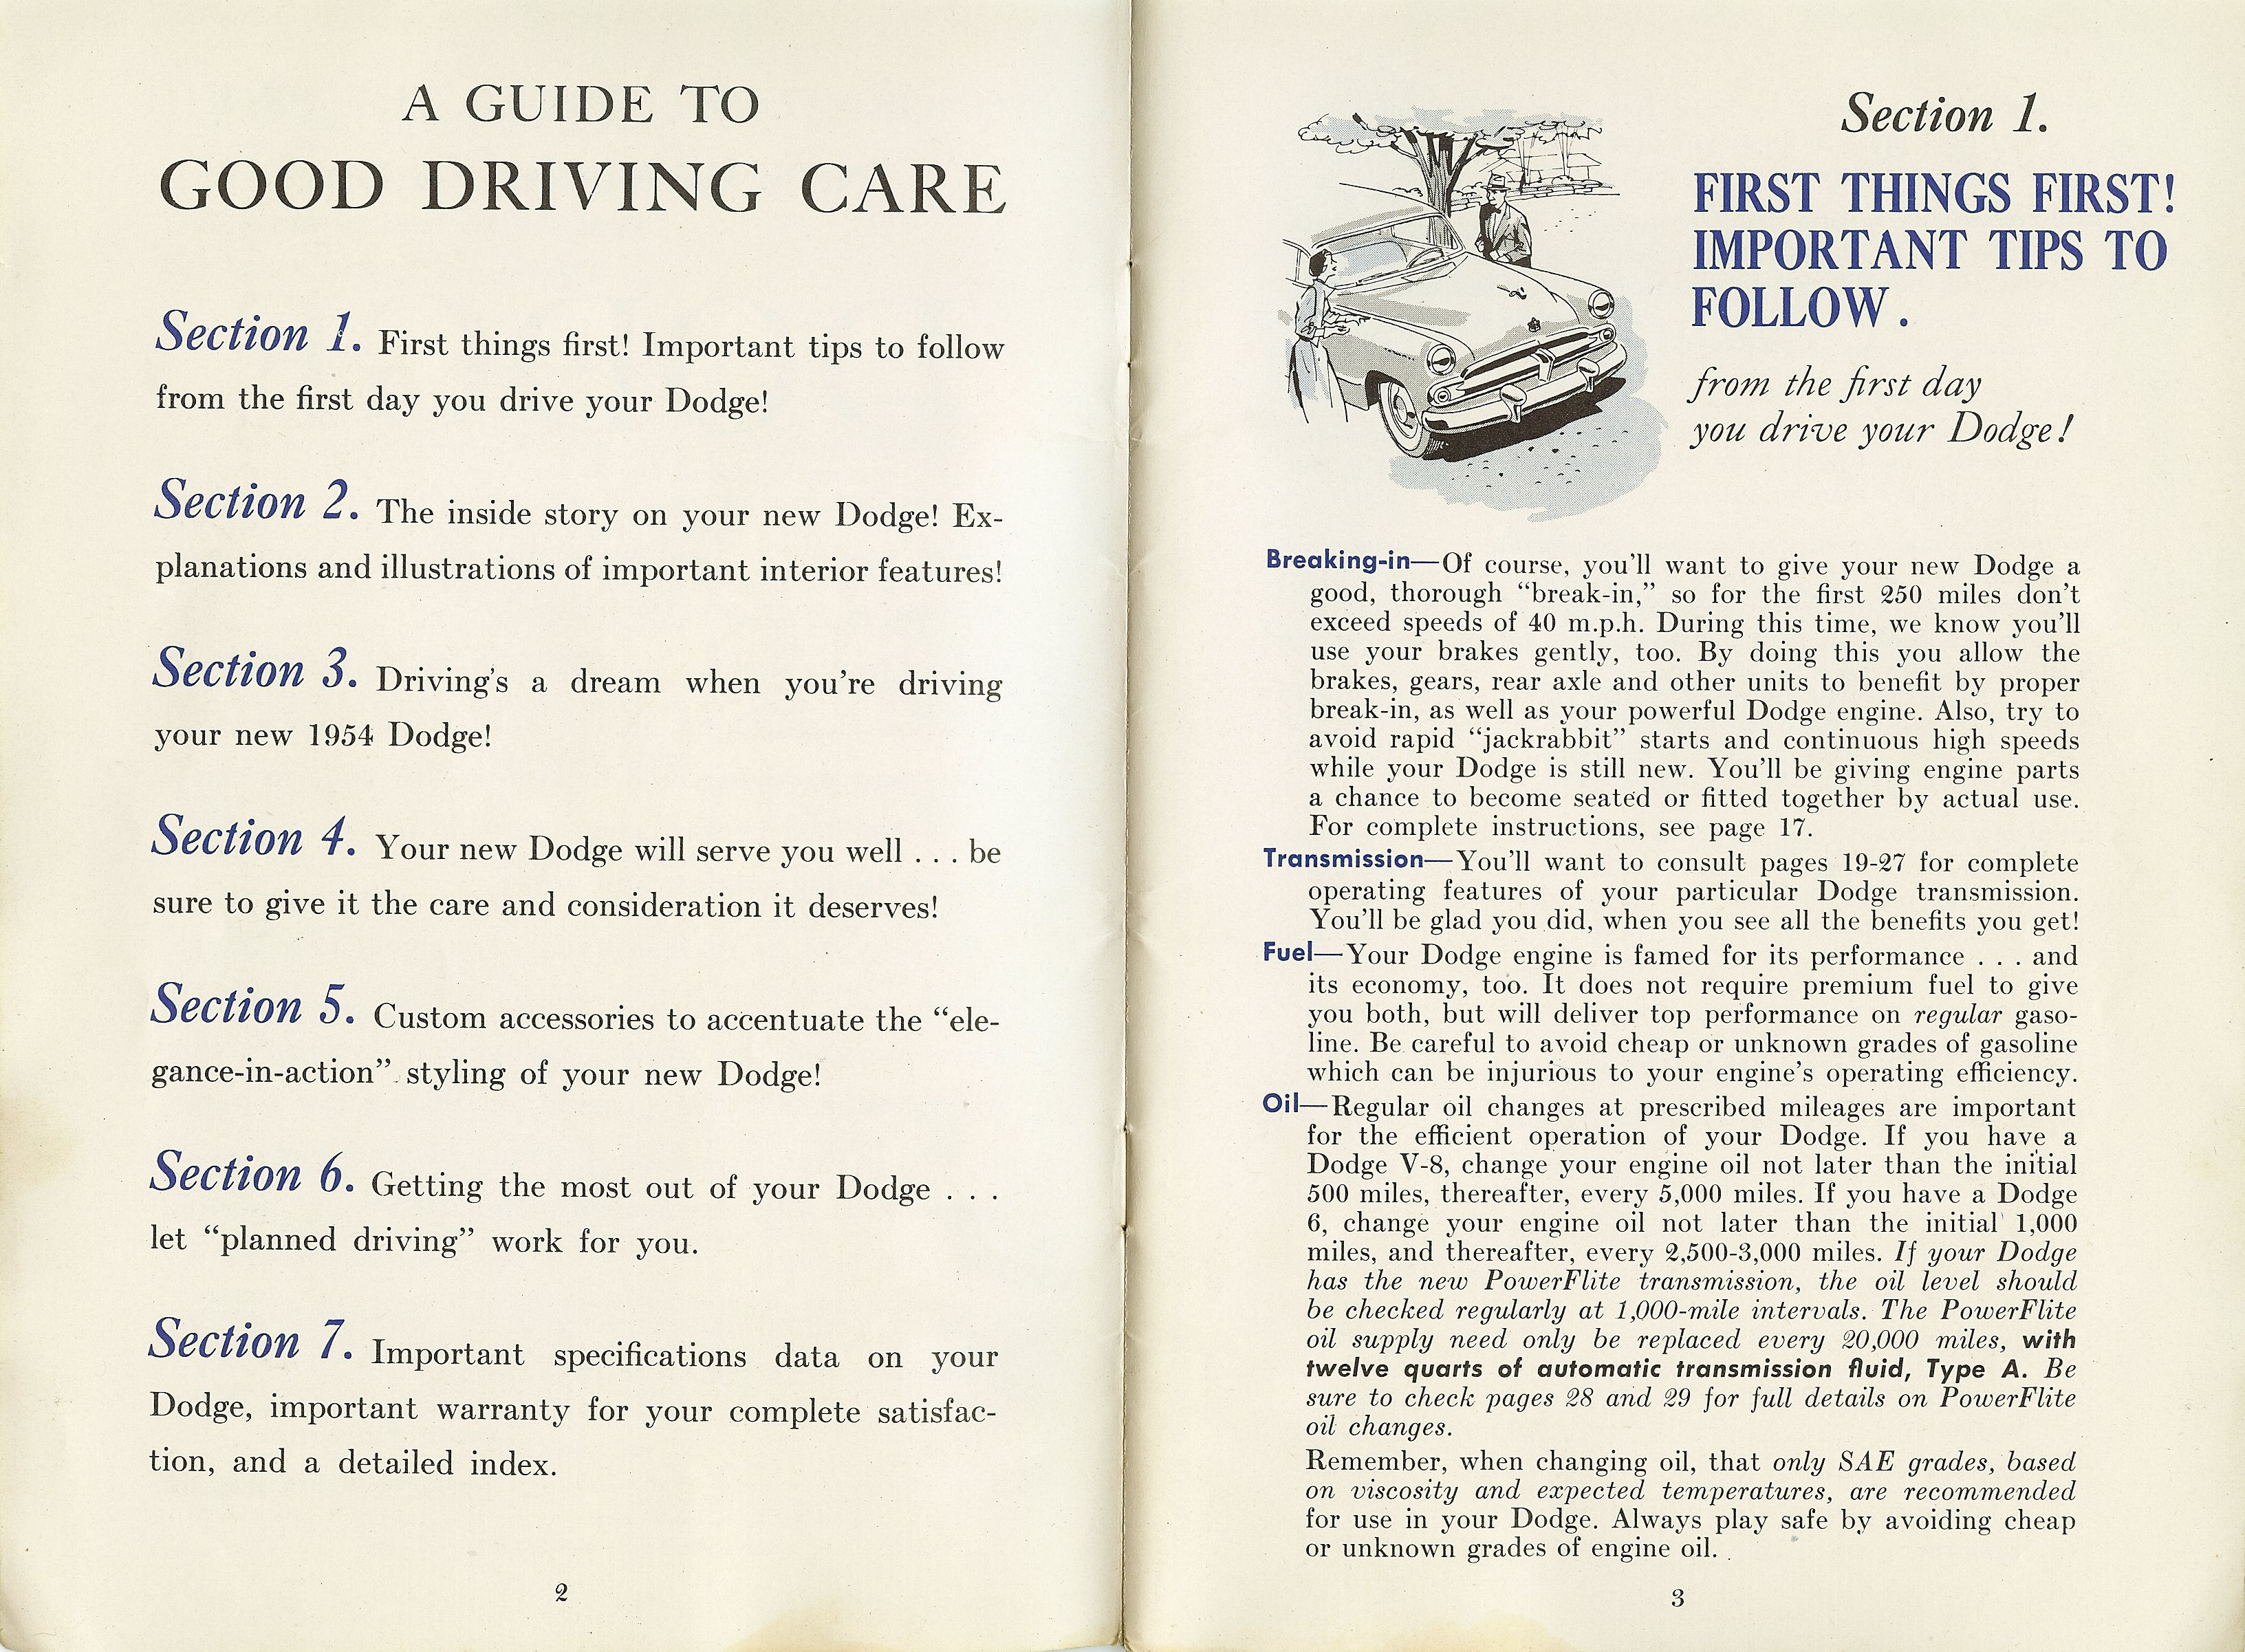 1954 Dodge Owners Manual-02-03